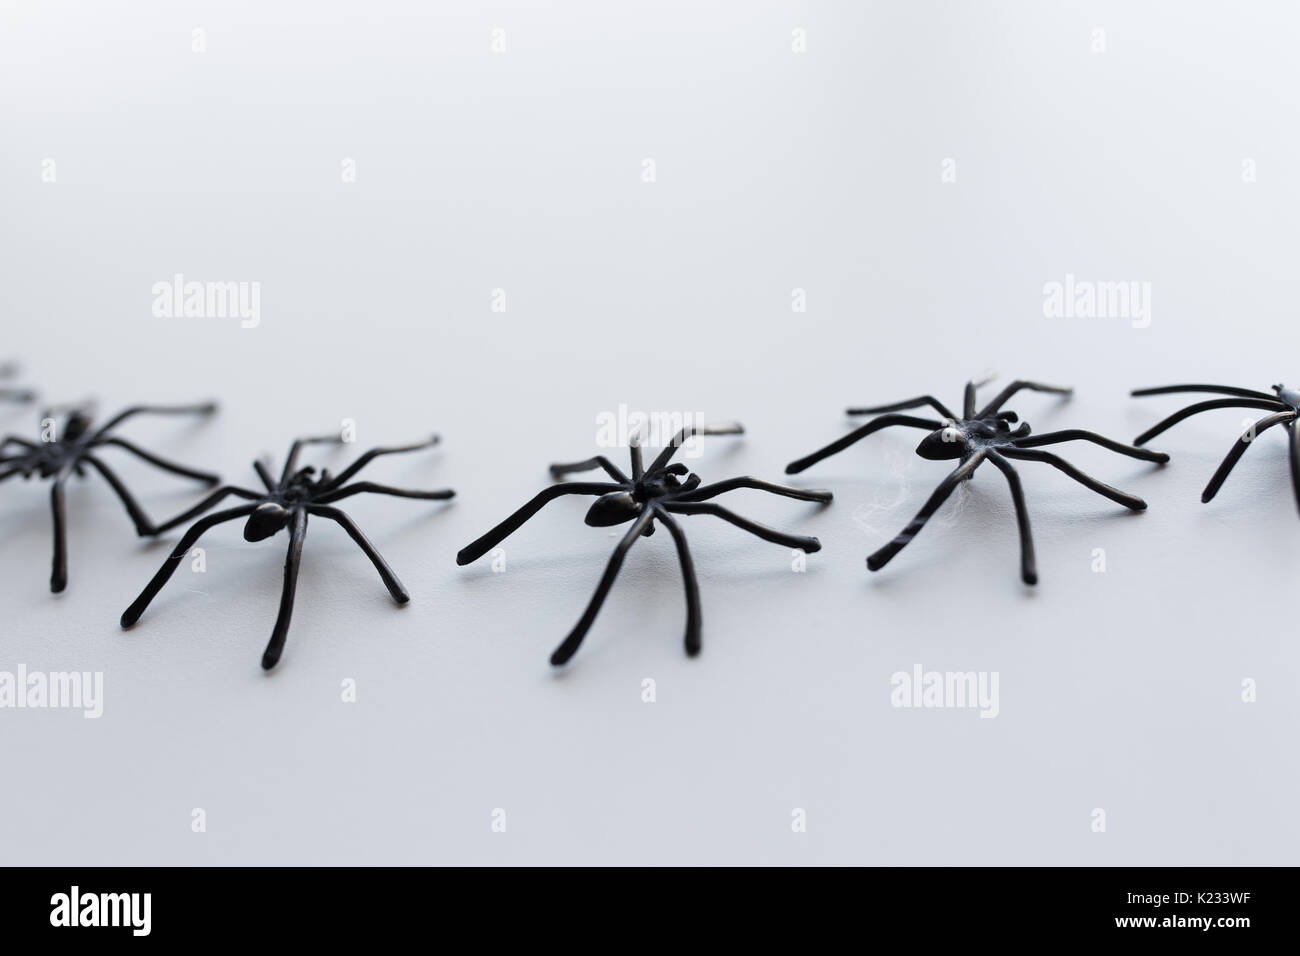 black toy spiders chain on white background Stock Photo